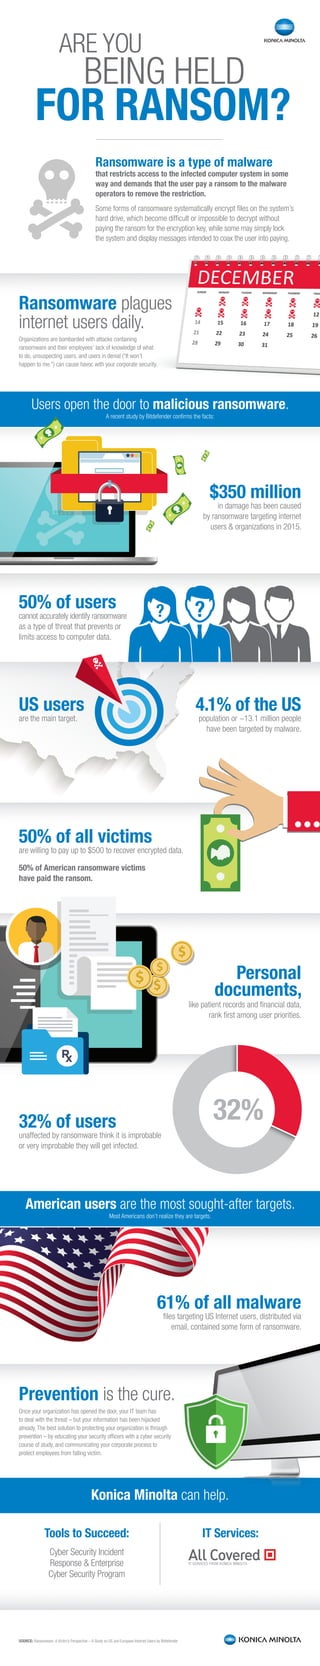 SOURCE: Ransomware. A Victim’s Perspective – A Study on US and European Internet Users by Bitdefender
ARE YOU
BEING HELD
FOR RANSOM?
Ransomware plagues
internet users daily.
Organizations are bombarded with attacks containing
ransomware and their employees’ lack of knowledge of what
to do, unsuspecting users, and users in denial (“It won’t
happen to me.”) can cause havoc with your corporate security.
Ransomware is a type of malware
that restricts access to the infected computer system in some
way and demands that the user pay a ransom to the malware
operators to remove the restriction.
Some forms of ransomware systematically encrypt files on the system’s
hard drive, which become difficult or impossible to decrypt without
paying the ransom for the encryption key, while some may simply lock
the system and display messages intended to coax the user into paying.
Prevention is the cure.
Once your organization has opened the door, your IT team has
to deal with the threat – but your information has been hijacked
already. The best solution to protecting your organization is through
prevention – by educating your security officers with a cyber security
course of study, and communicating your corporate process to
protect employees from falling victim.
Tools to Succeed:
Cyber Security Incident
Response & Enterprise
Cyber Security Program
IT Services:
$350 million
in damage has been caused
by ransomware targeting internet
users & organizations in 2015.
US users
are the main target.
50% of users
cannot accurately identify ransomware
as a type of threat that prevents or
limits access to computer data.
50% of all victims
are willing to pay up to $500 to recover encrypted data.
50% of American ransomware victims
have paid the ransom.
32% of users
unaffected by ransomware think it is improbable
or very improbable they will get infected.
61% of all malware
files targeting US Internet users, distributed via
email, contained some form of ransomware.
32%
Personal
documents,
like patient records and financial data,
rank first among user priorities.
4.1% of the US
population or ~13.1 million people
have been targeted by malware.
American users are the most sought-after targets.
Most Americans don’t realize they are targets.
Konica Minolta can help.
Users open the door to malicious ransomware.
A recent study by Bitdefender confirms the facts:
 